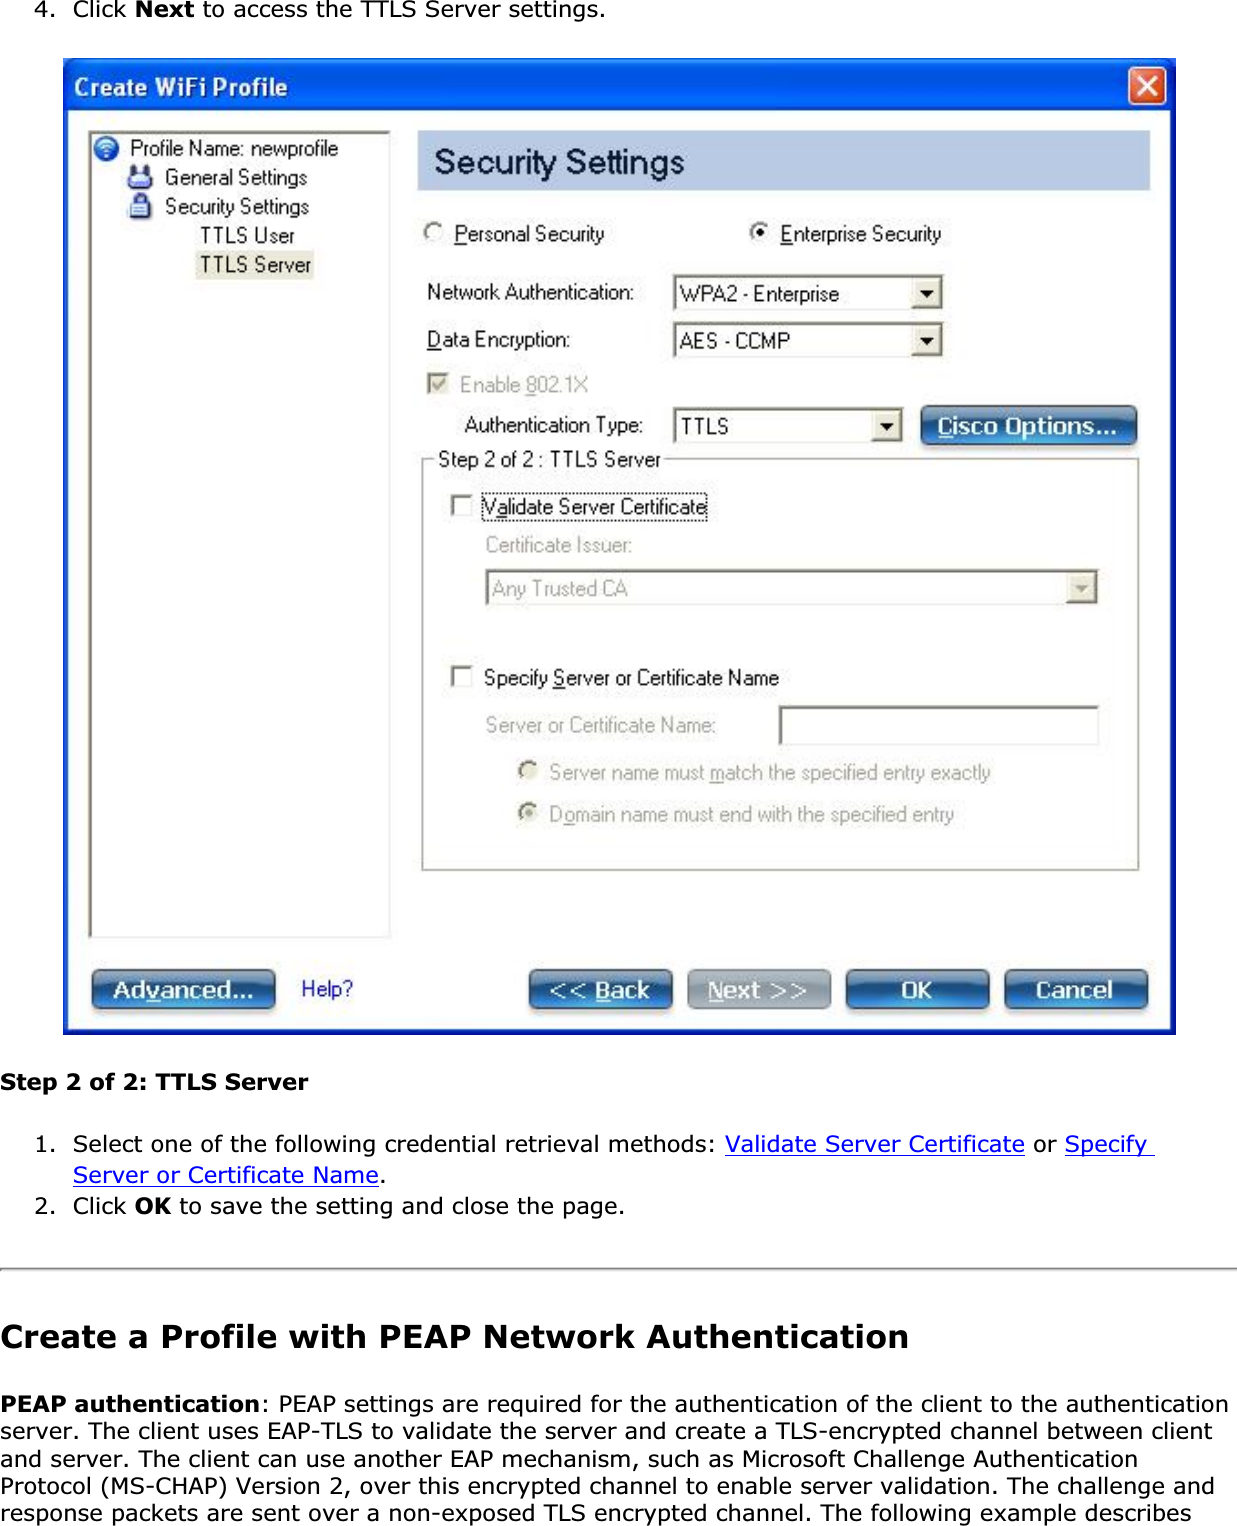 4. Click Next to access the TTLS Server settings.Step 2 of 2: TTLS Server1. Select one of the following credential retrieval methods: Validate Server Certificate or SpecifyServer or Certificate Name.2. Click OK to save the setting and close the page.Create a Profile with PEAP Network Authentication PEAP authentication: PEAP settings are required for the authentication of the client to the authentication server. The client uses EAP-TLS to validate the server and create a TLS-encrypted channel between client and server. The client can use another EAP mechanism, such as Microsoft Challenge Authentication Protocol (MS-CHAP) Version 2, over this encrypted channel to enable server validation. The challenge and response packets are sent over a non-exposed TLS encrypted channel. The following example describes 